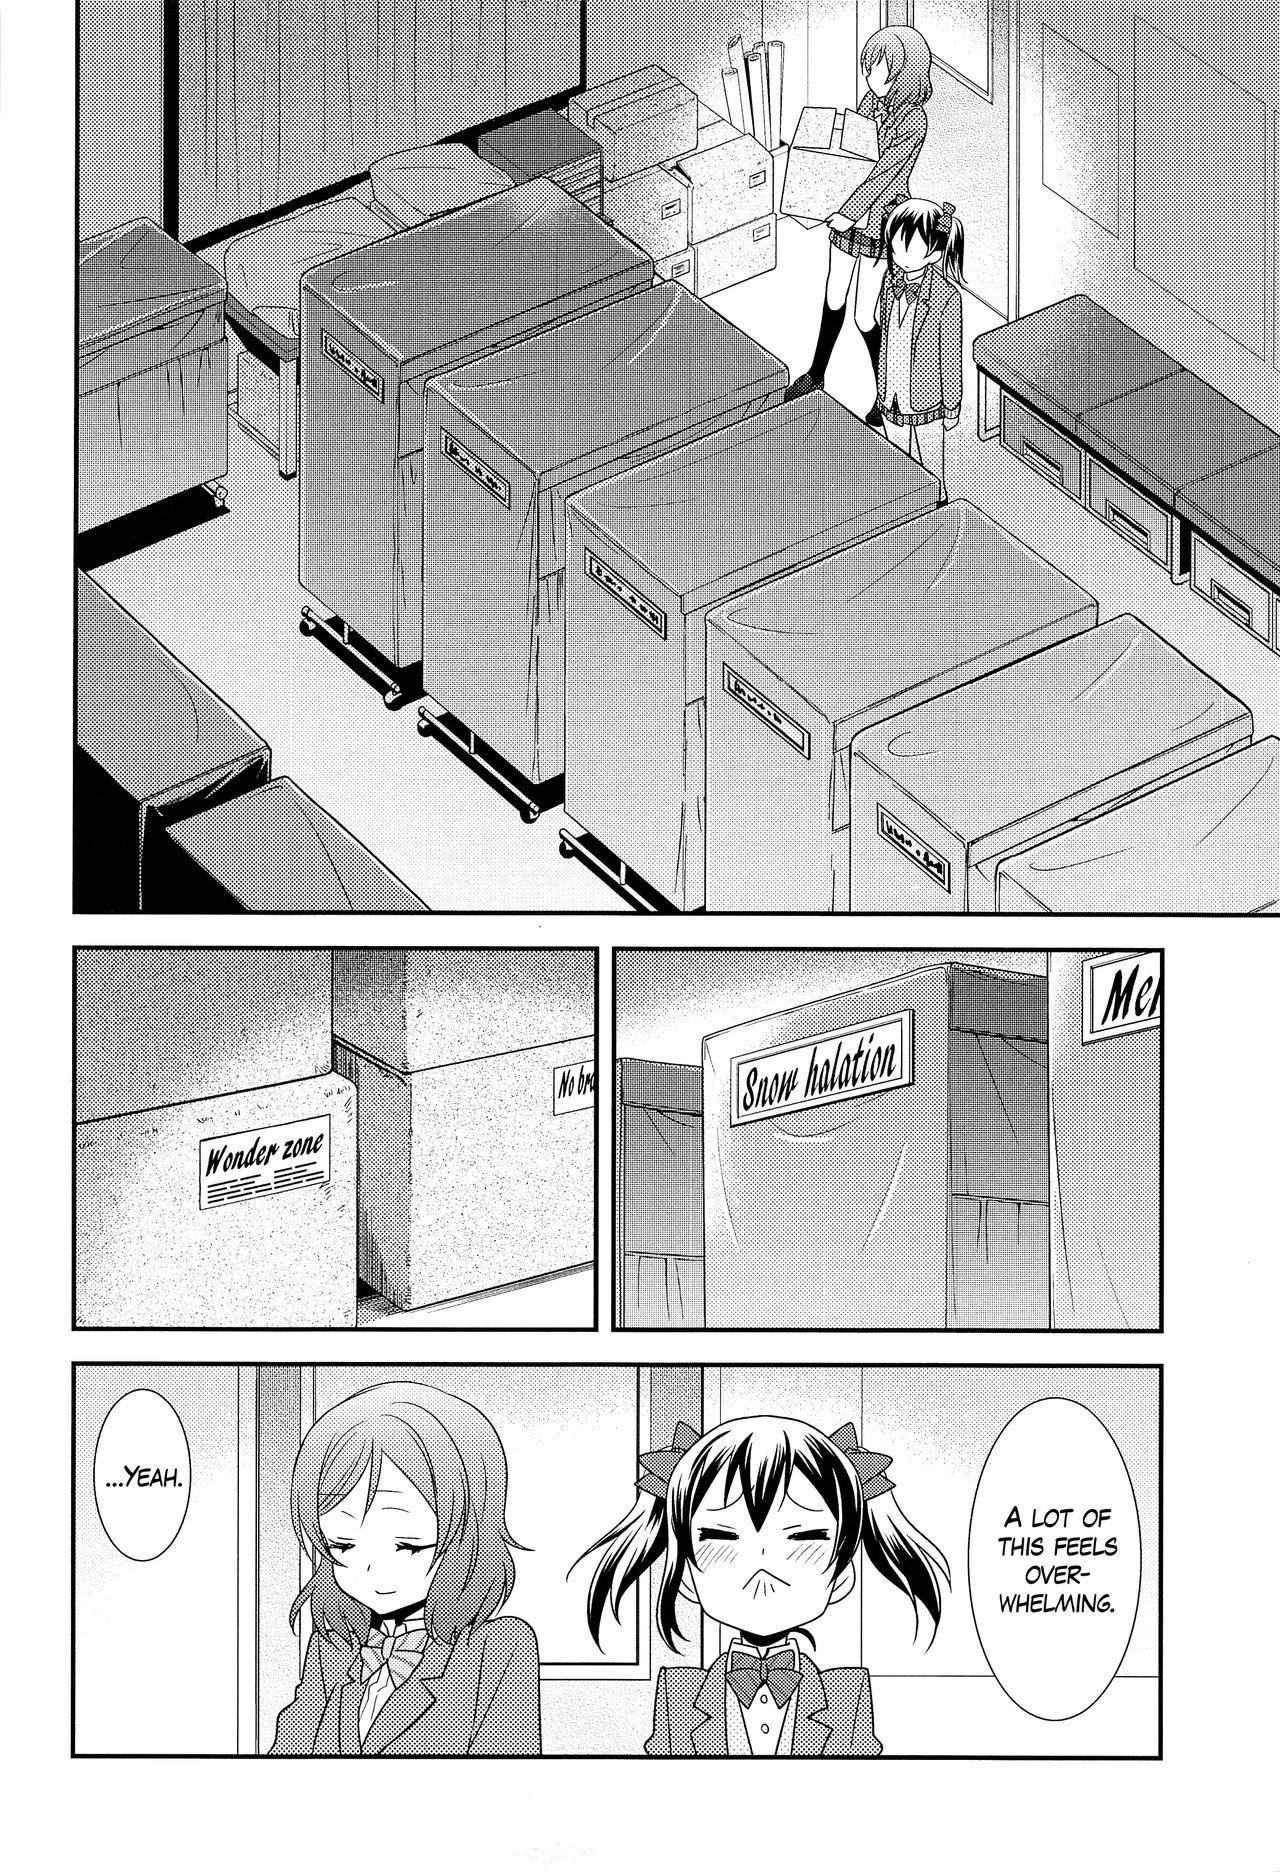 Sex Toy Bokura no Te ni wa Ai Shika nai. | There’s Nothing but Love In Our Hands. - Love live Sex Pussy - Page 10